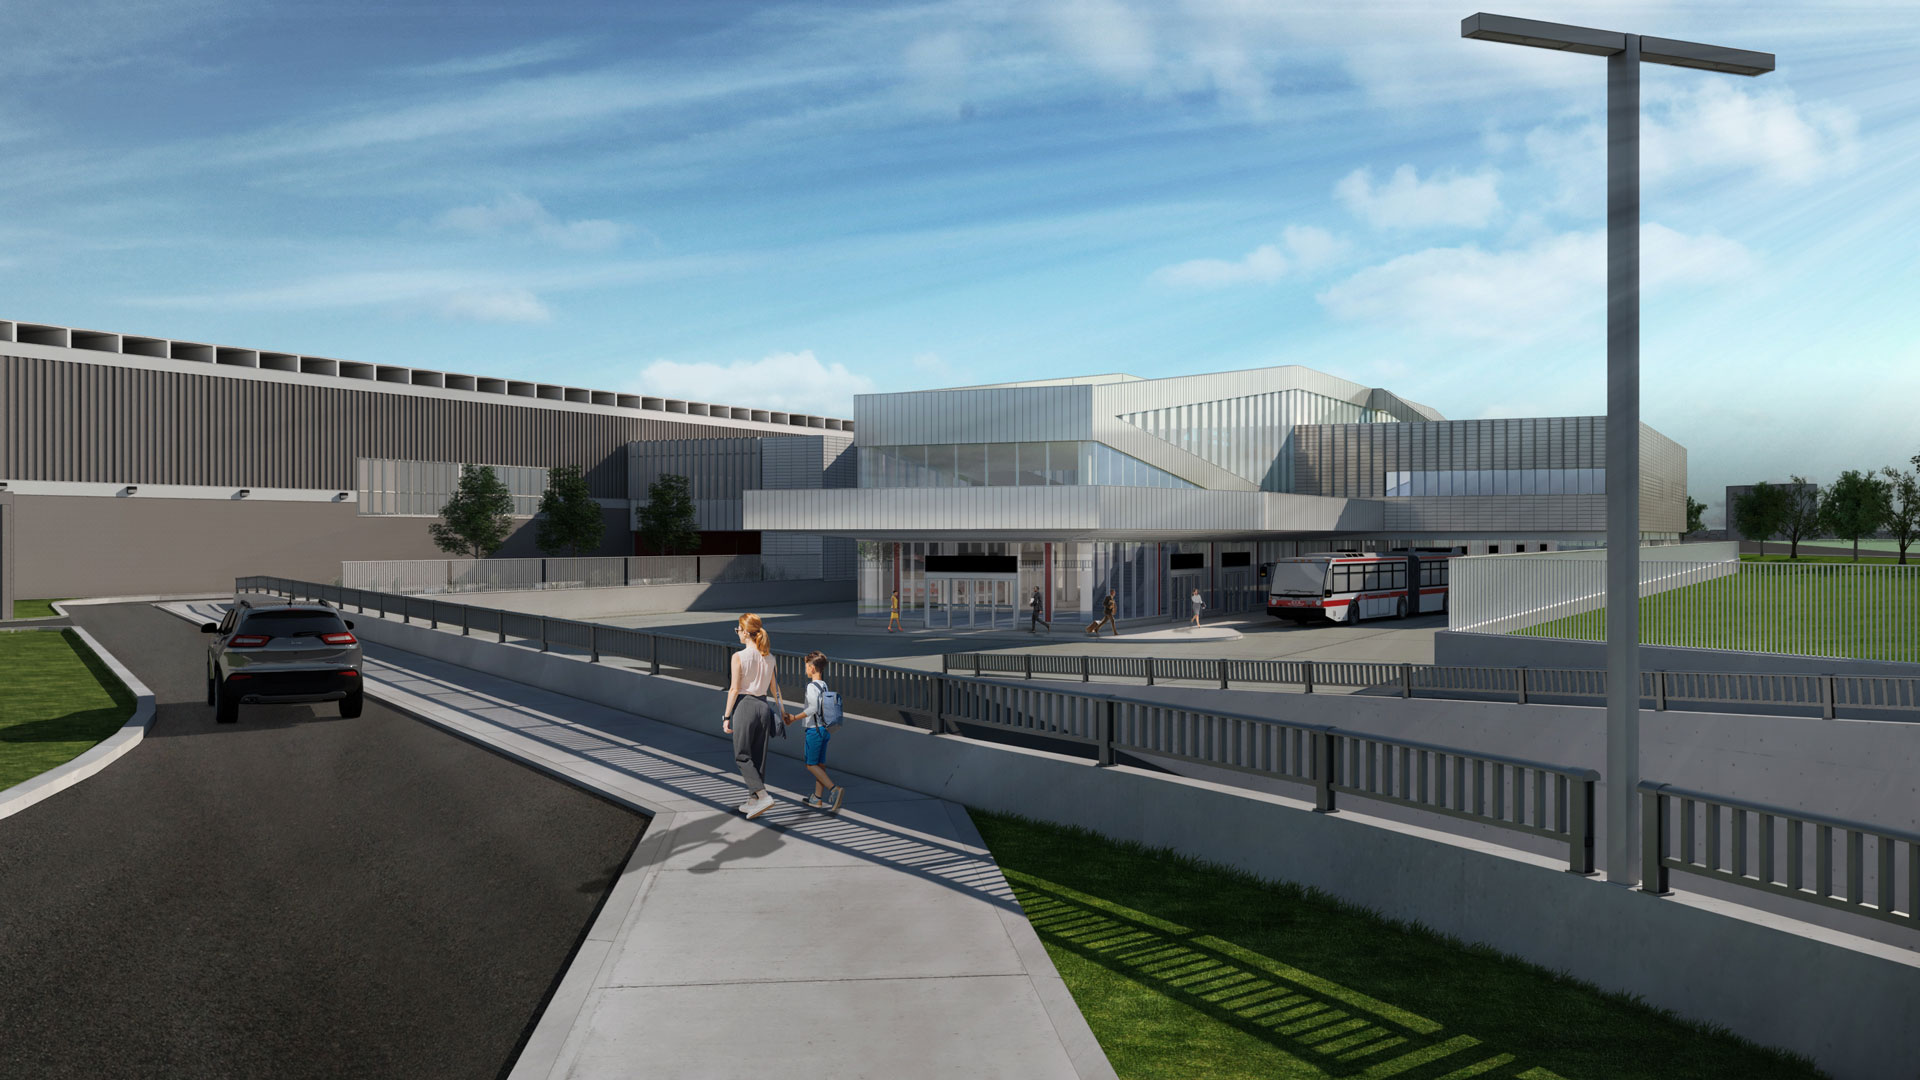 Artist conception of the new bus bays at Warden Station